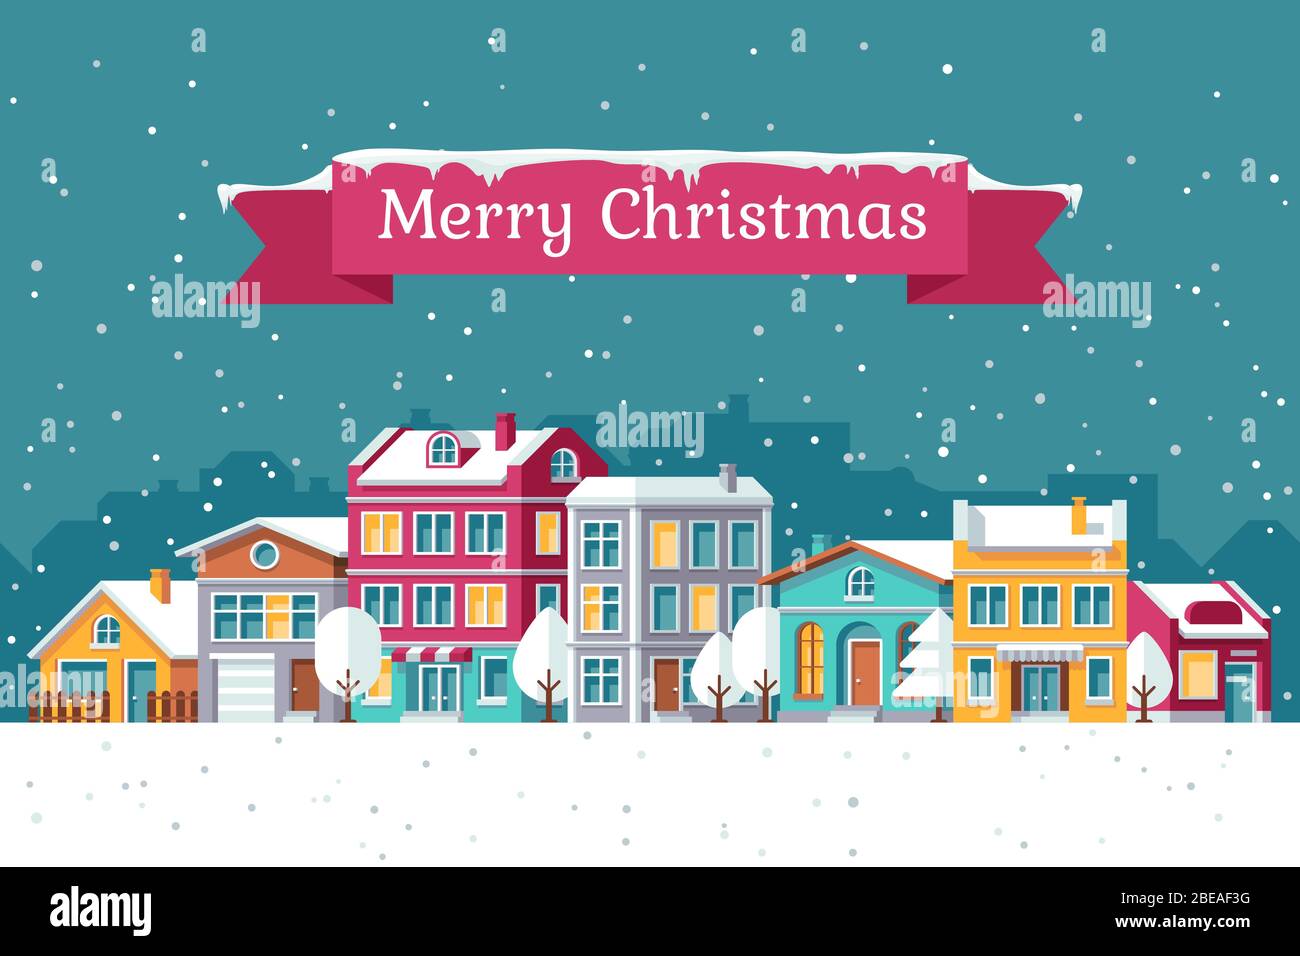 Christmas holiday vector greeting card with winter cityscape in snow. Christmas town building, cityscape winter illustration Stock Vector